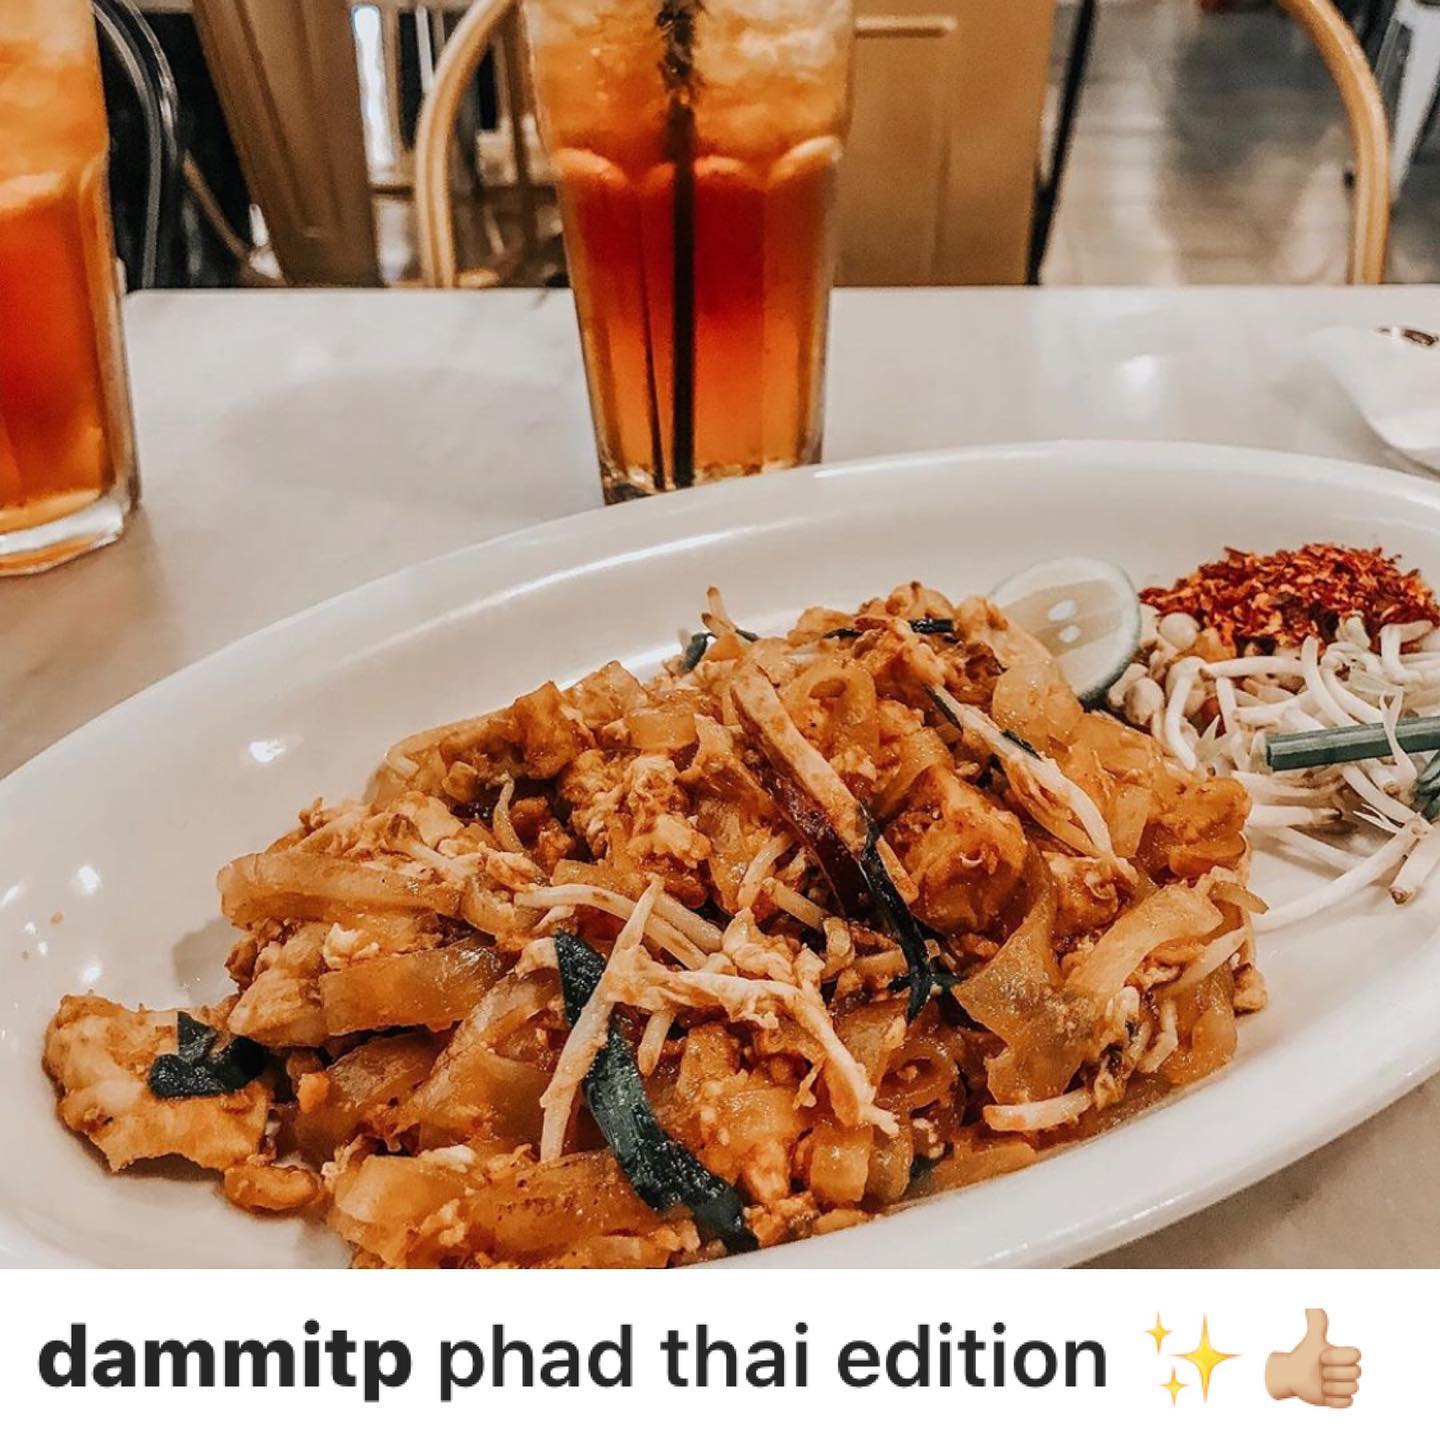 Phad Thai Kinley Thai Bistro
Thank you for the thumbs up  
@dammitp ️
Read more